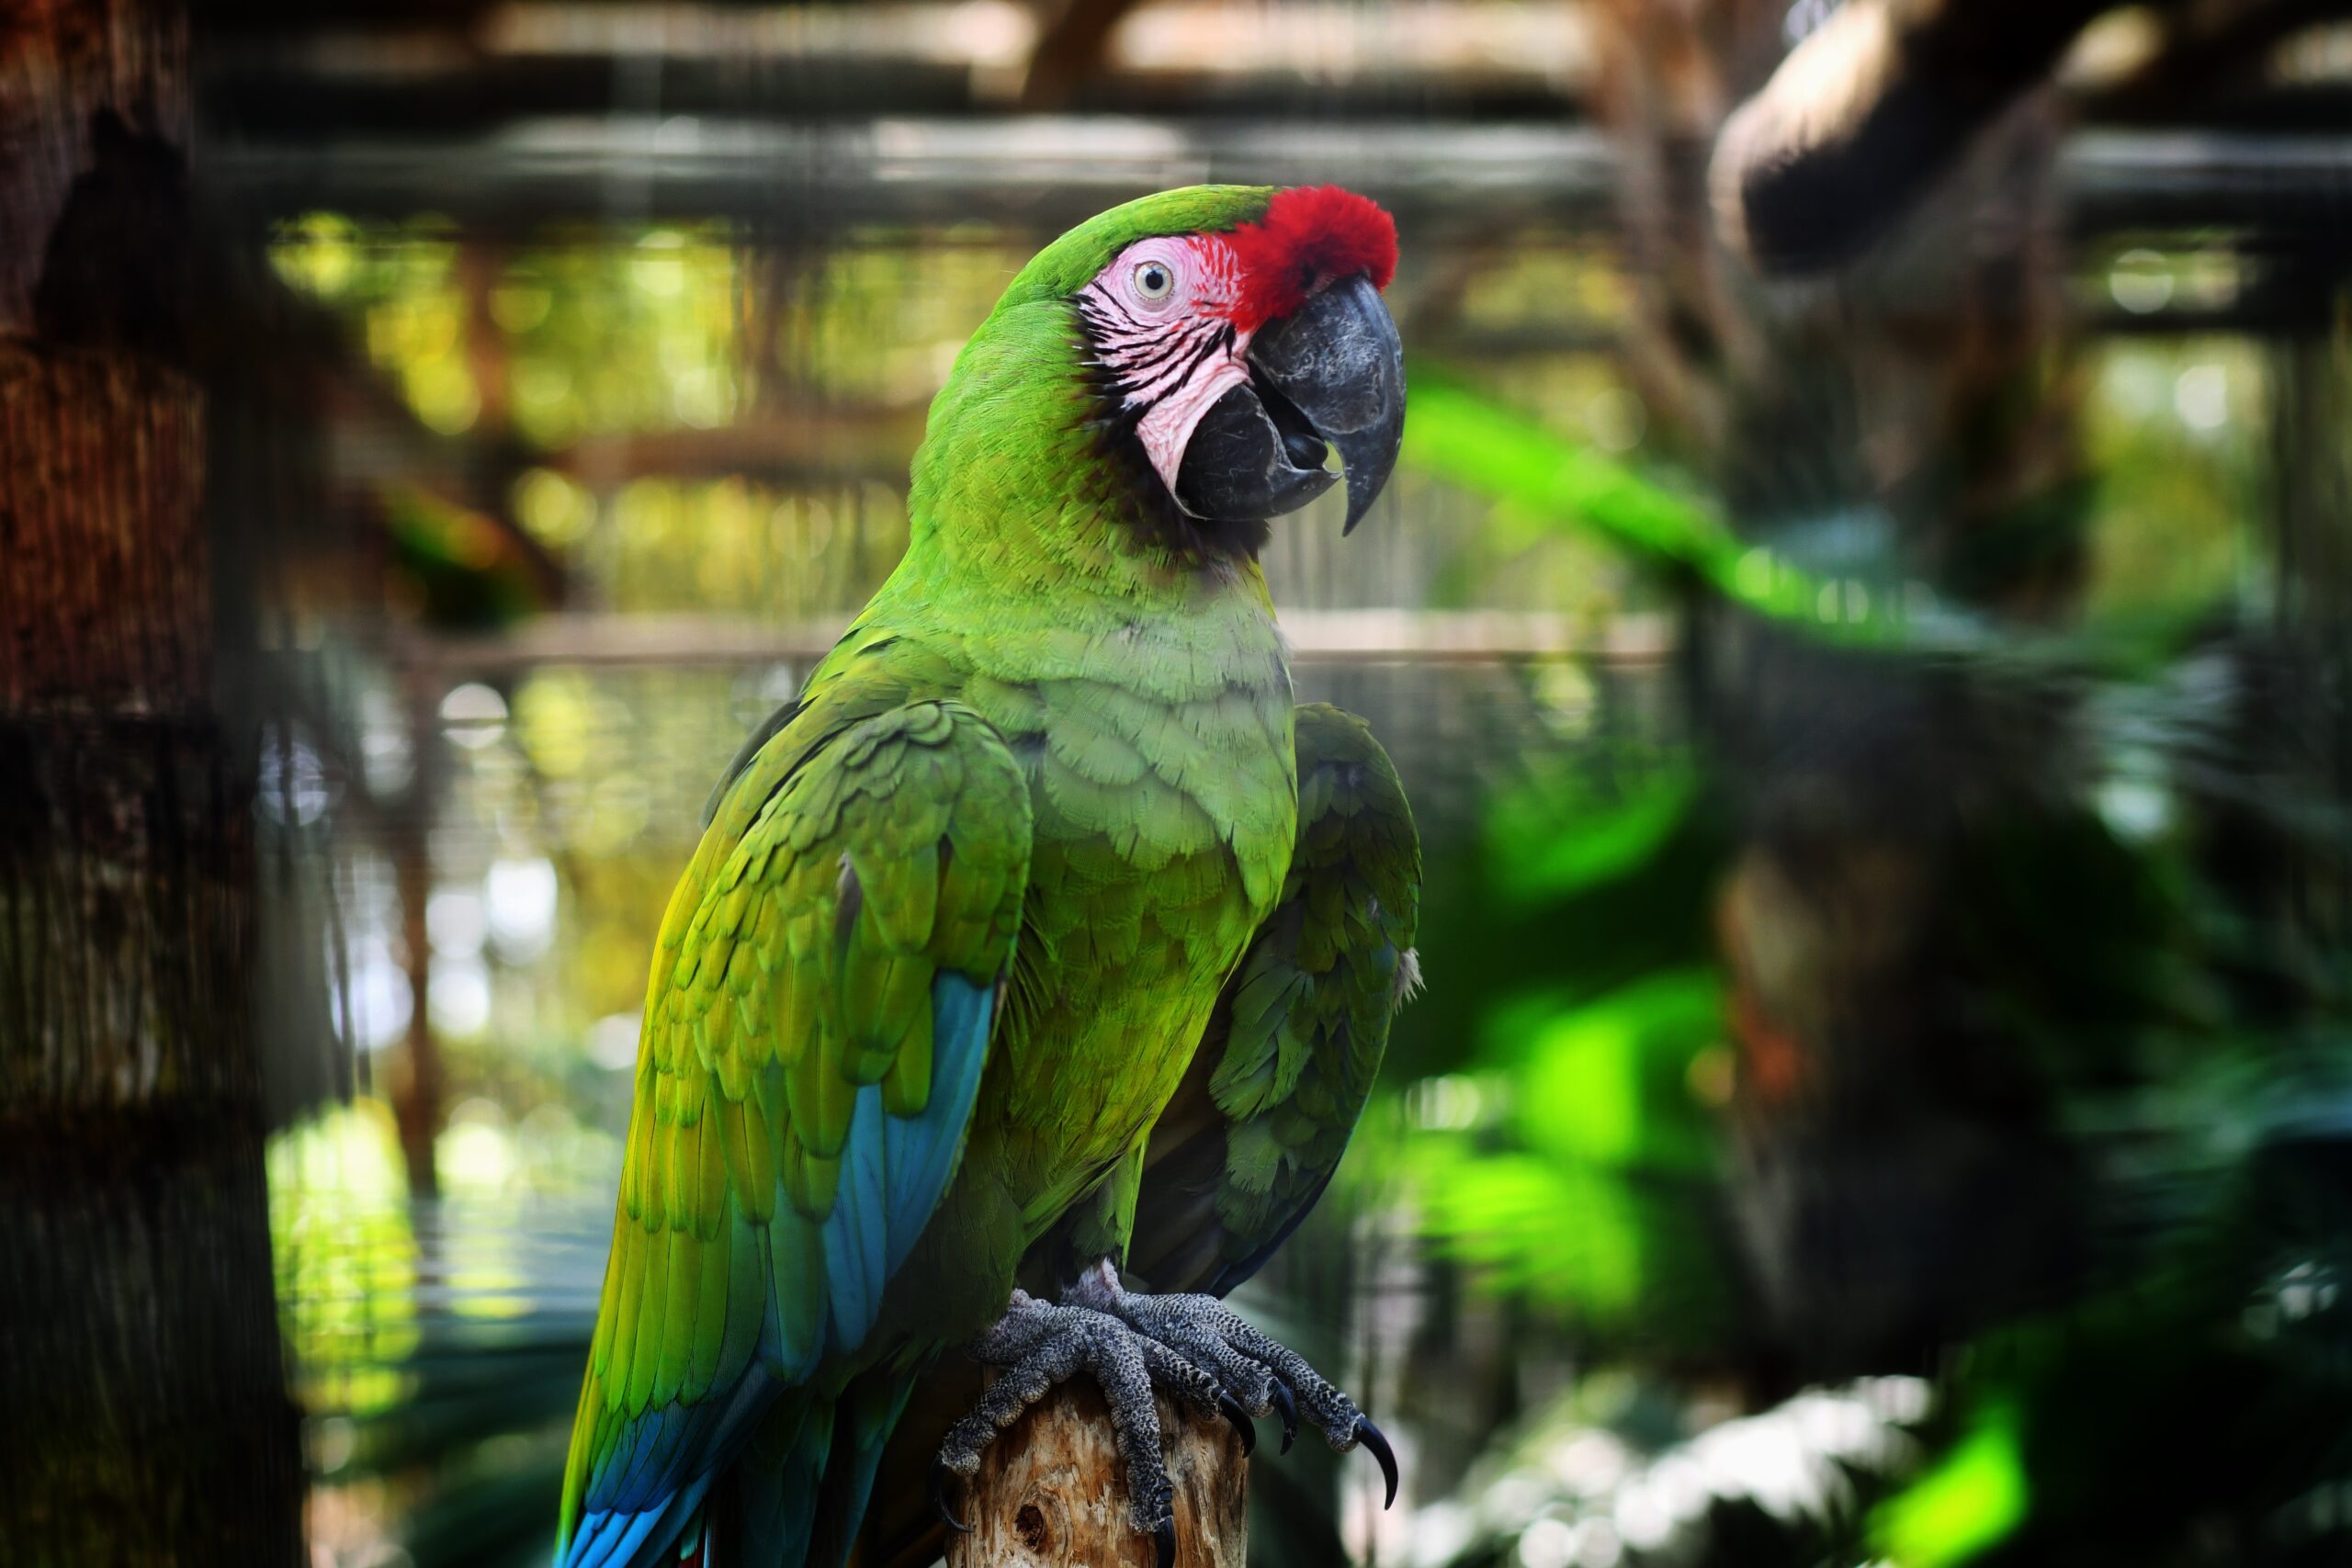 Military Macaw photo by Max Harlynking